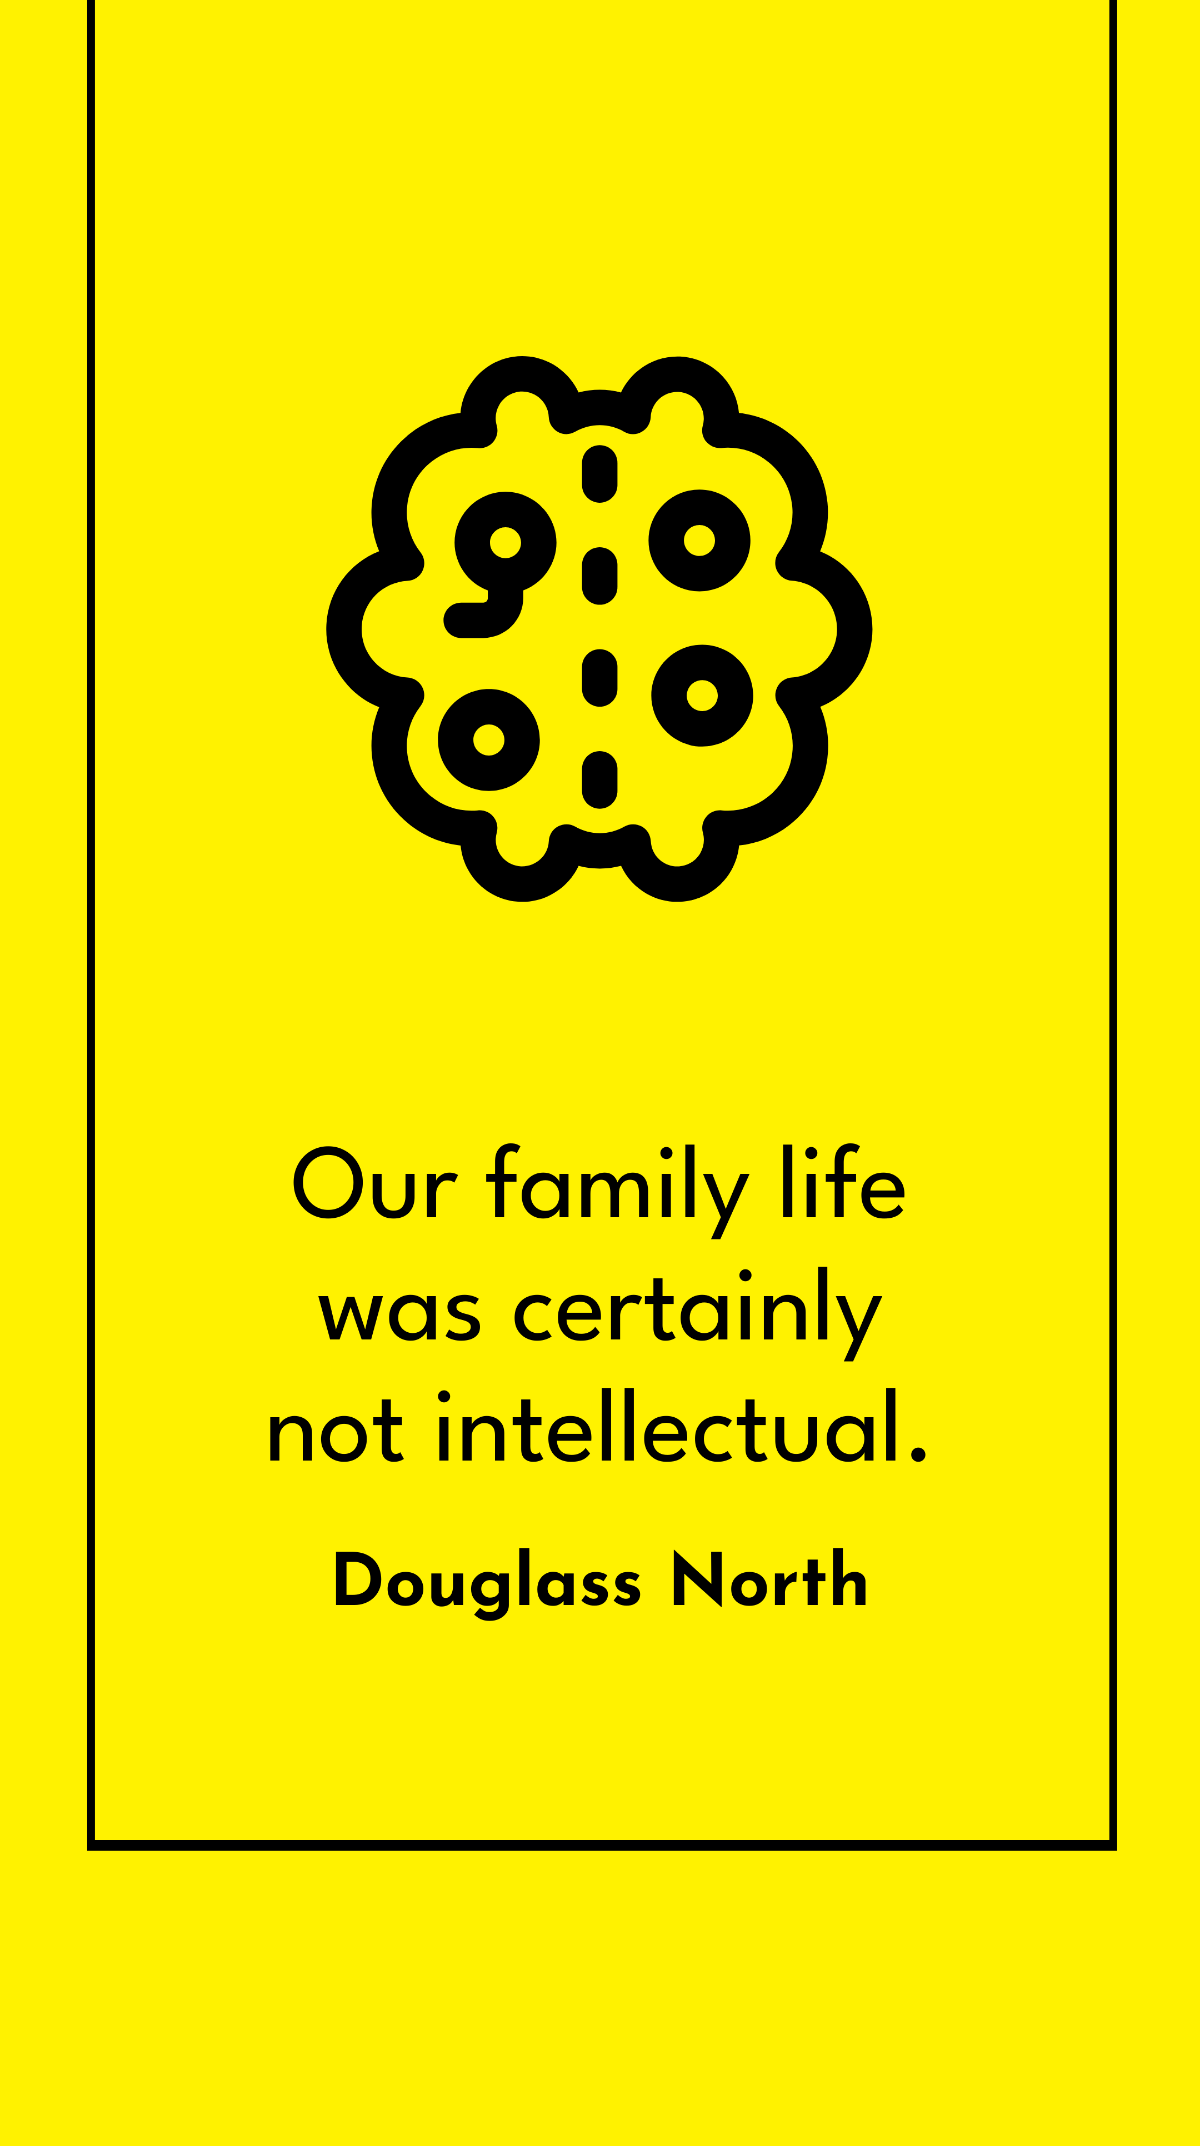 Douglass North - Our family life was certainly not intellectual. Template